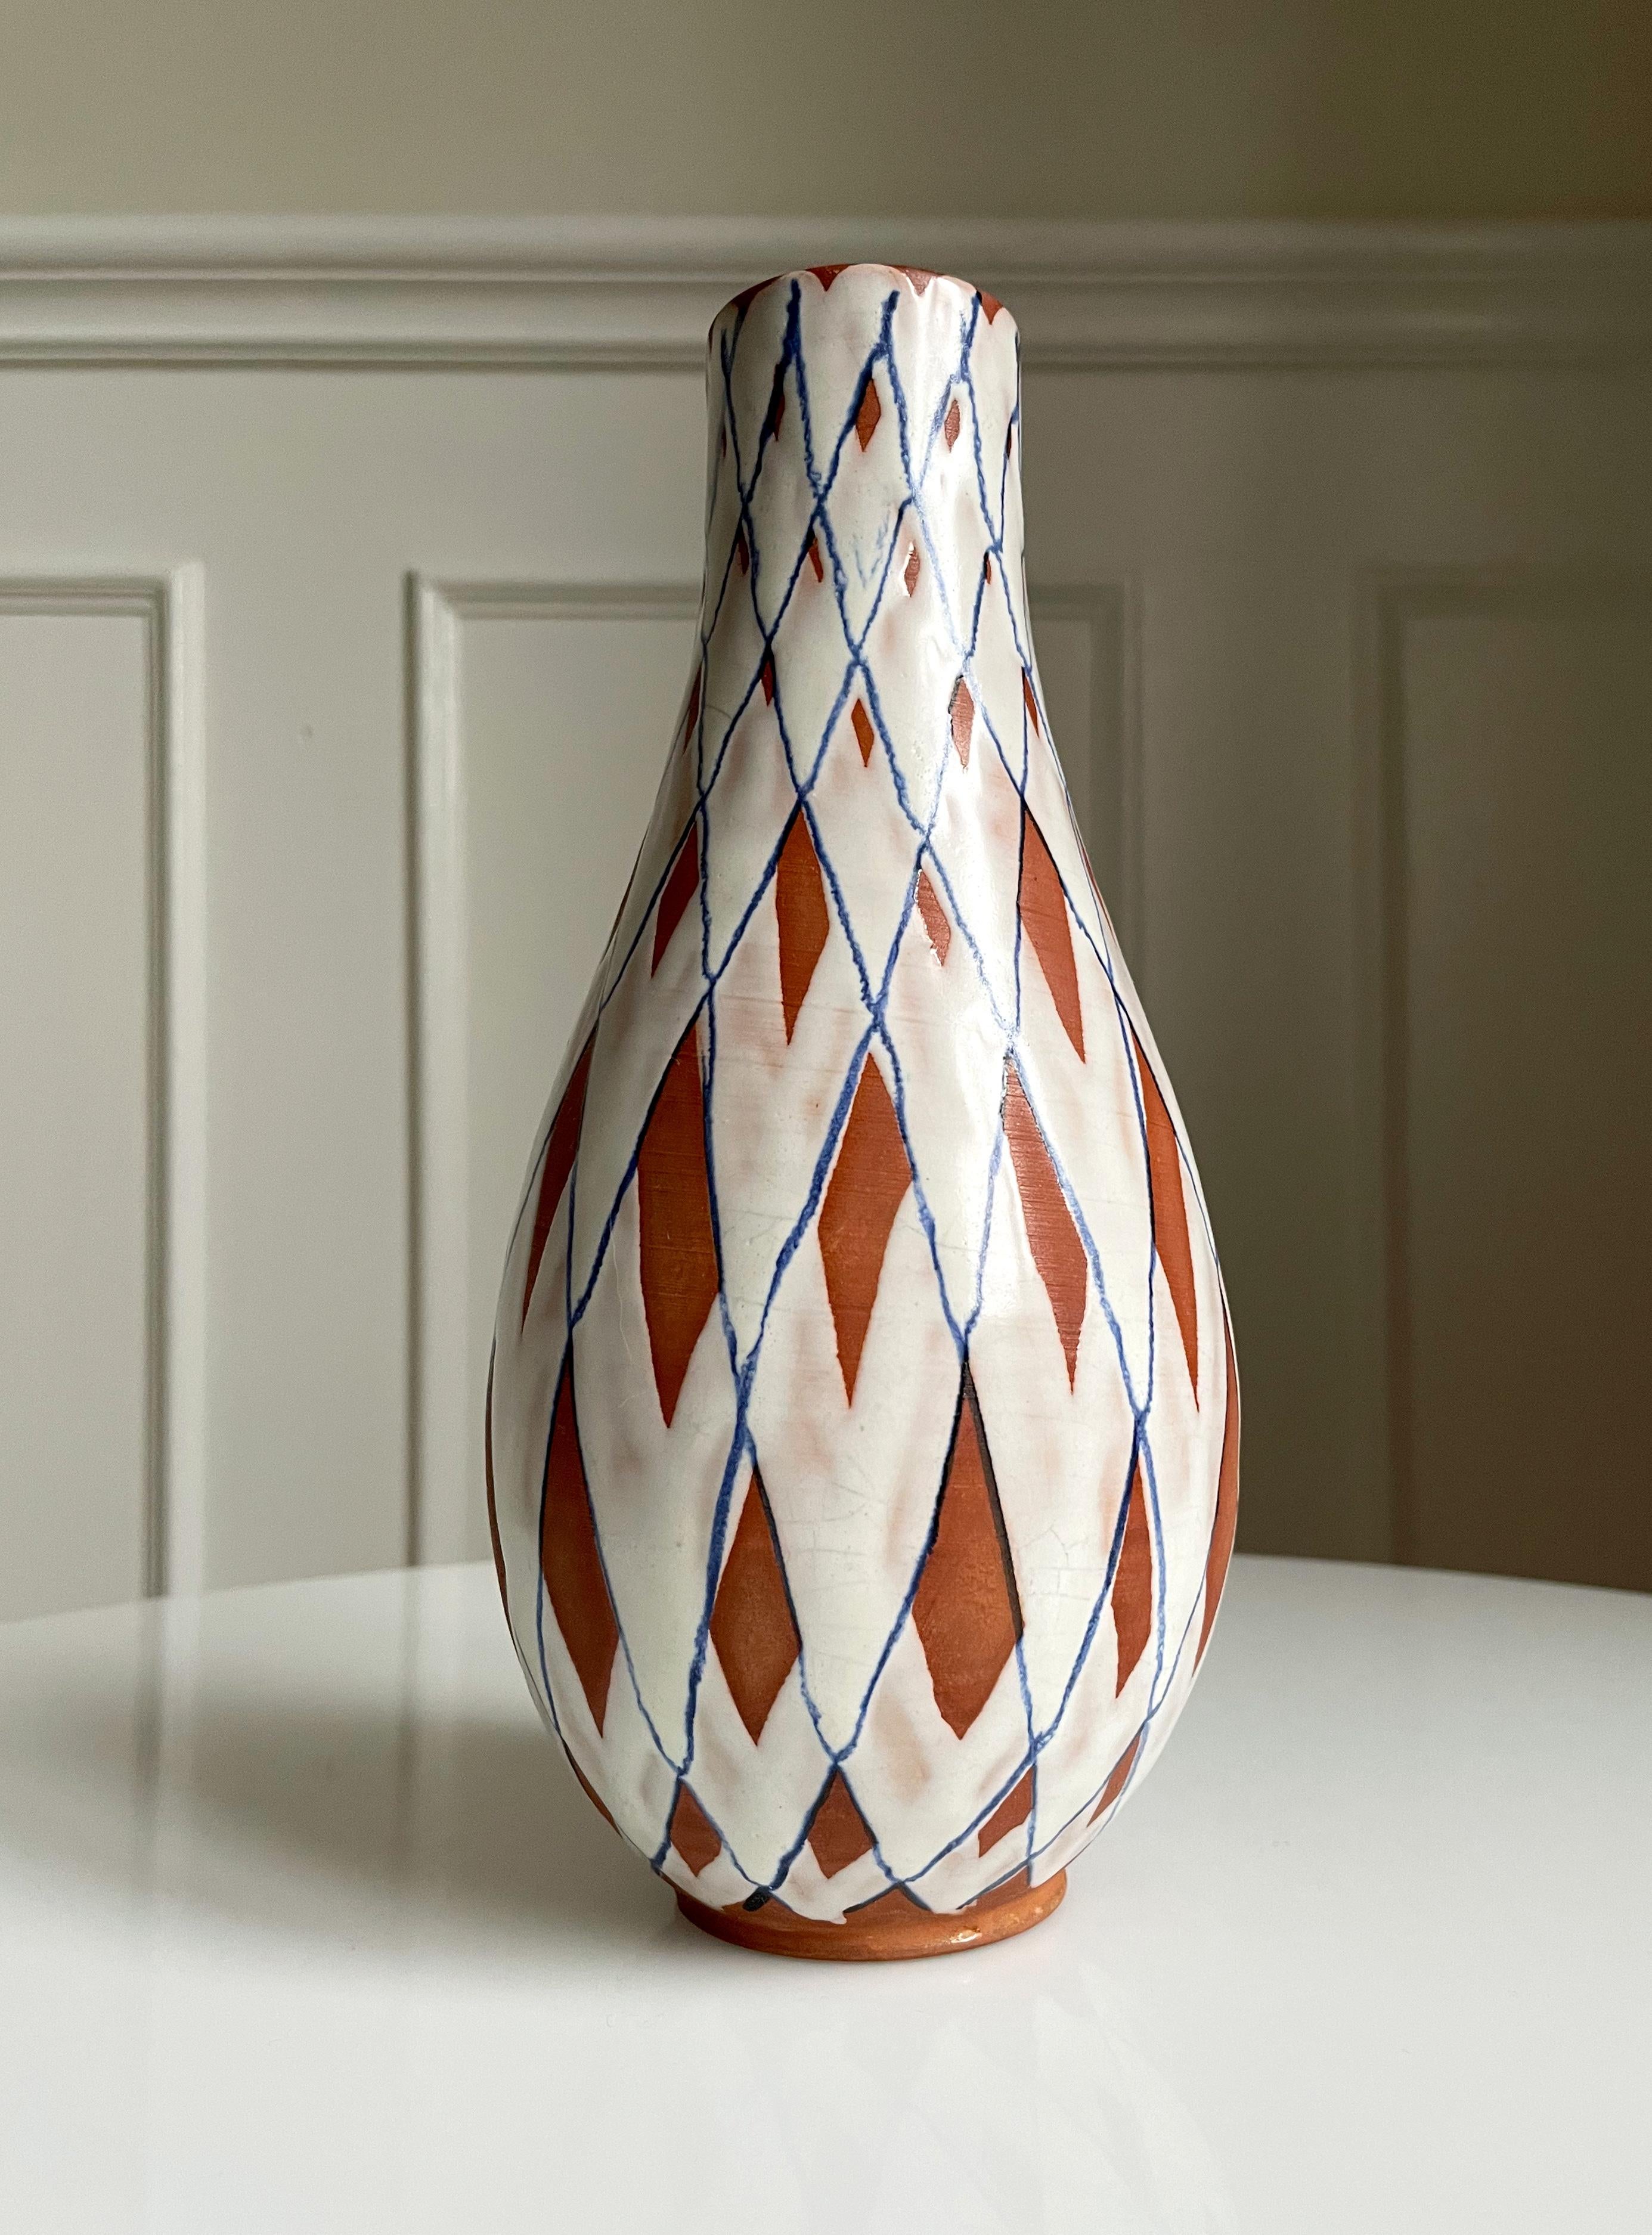 Hand-painted 80 years old ceramic vase with checkered decoration manufactured by Gabriel Keramik in Sweden in the 1940s. Partially glazed in white and a thin blue stripe, partially unglazed and raw. Fully glazed on the inside. Stamped under base.